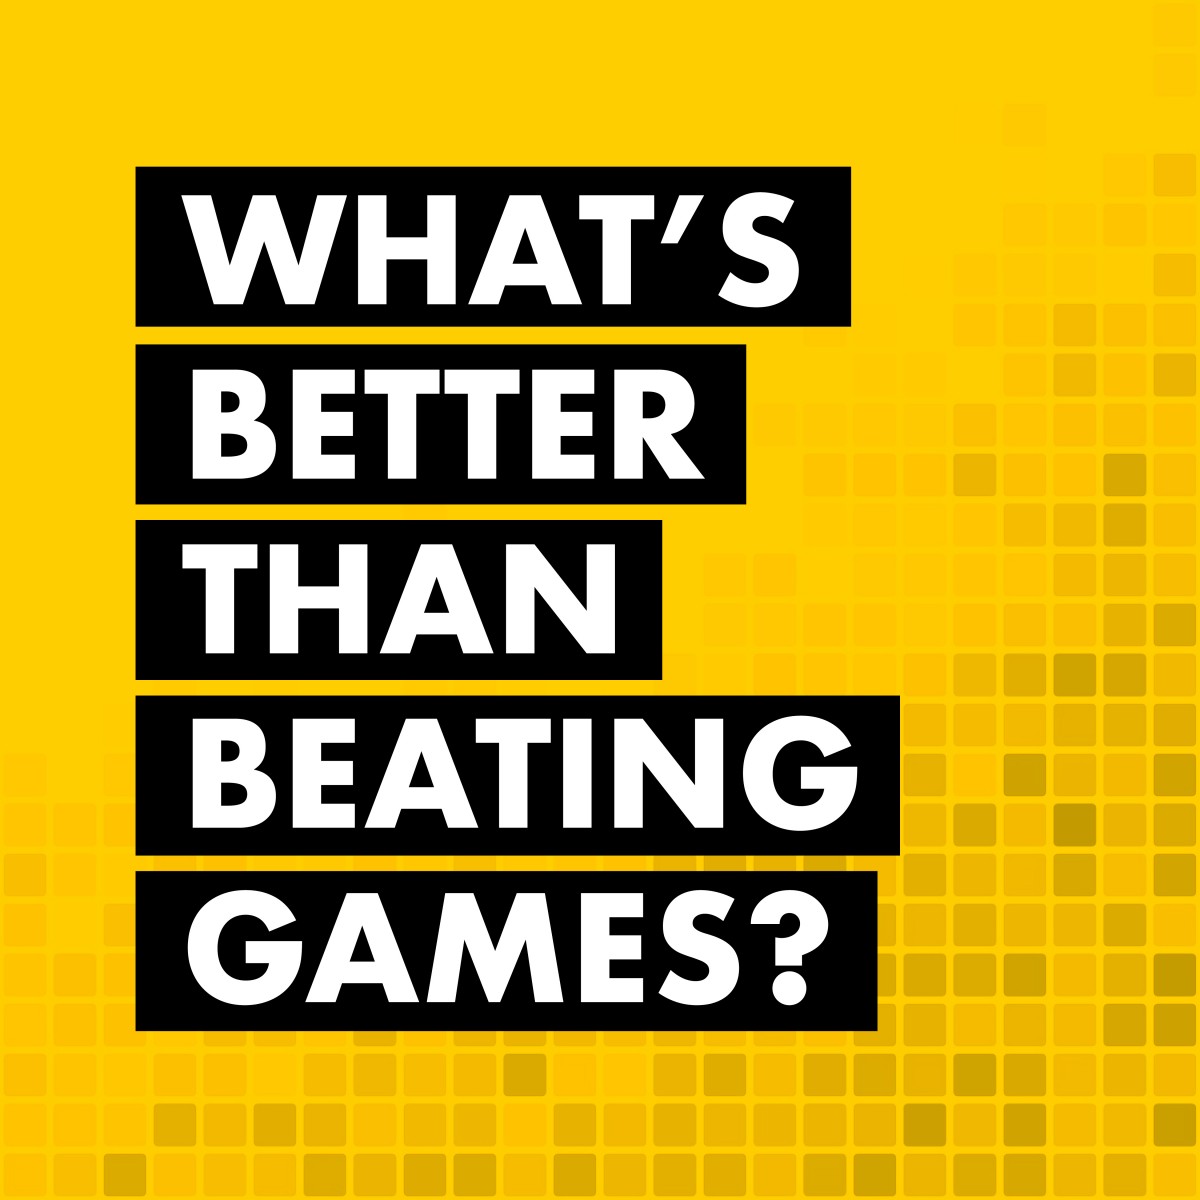 What's better than beating games?